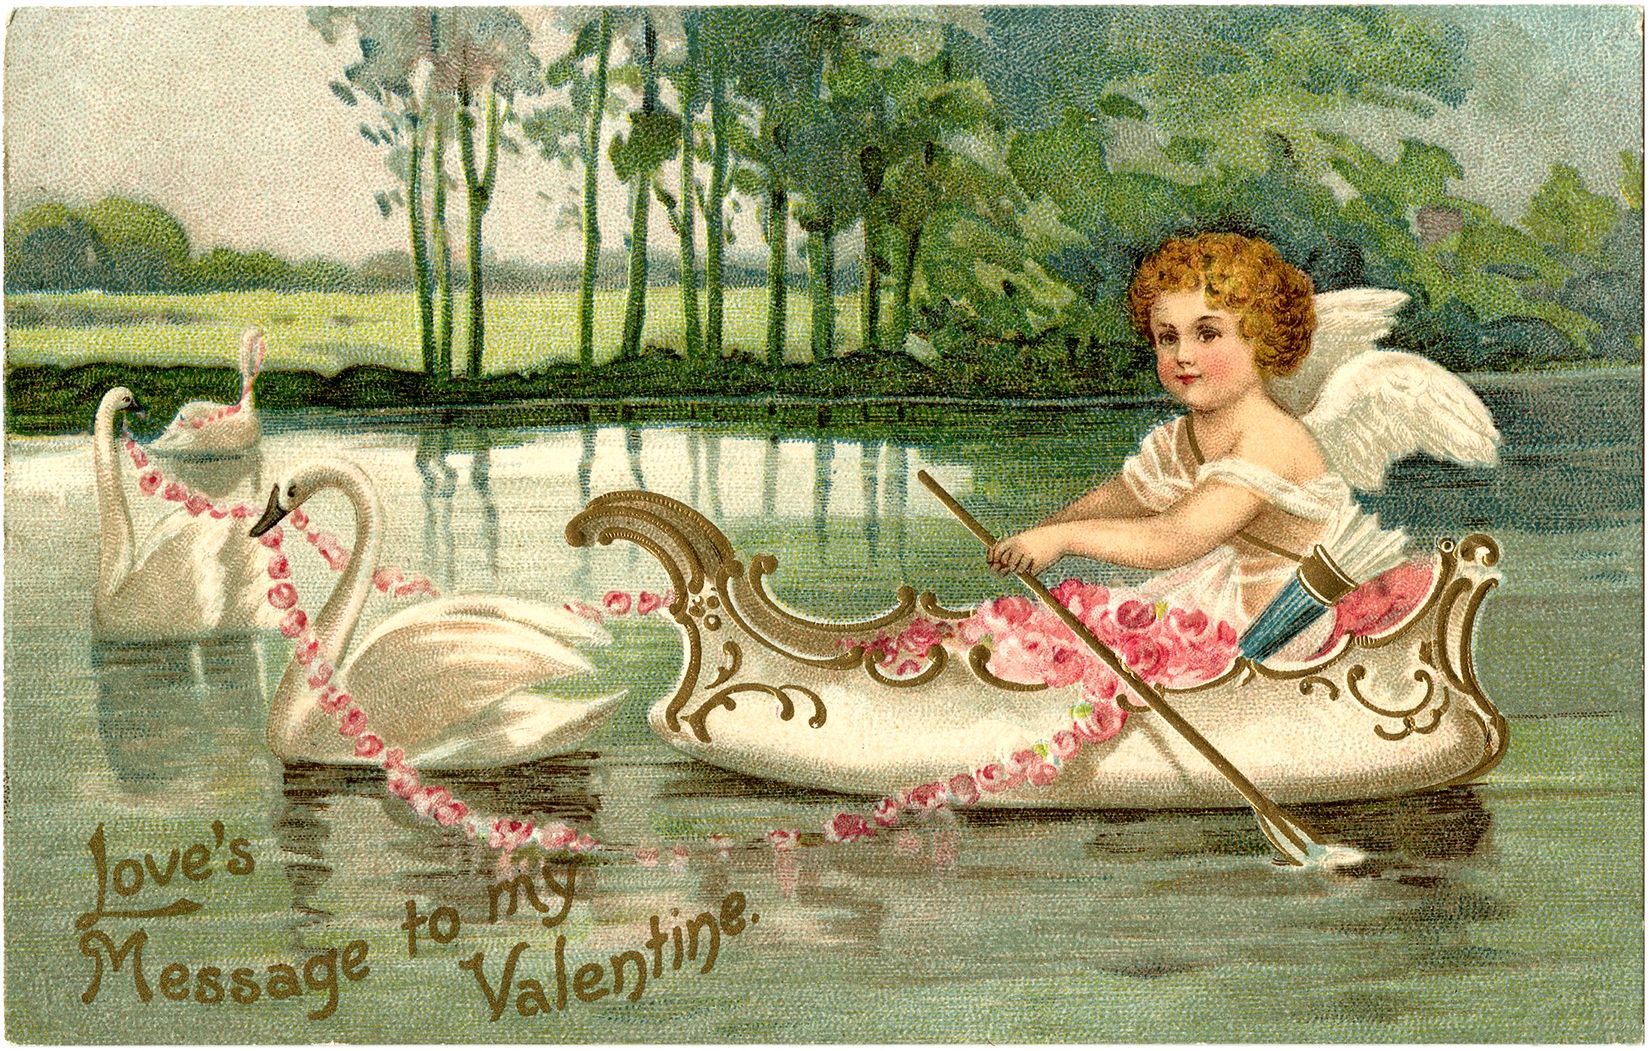 A postcard of an angel in the water - Cupid